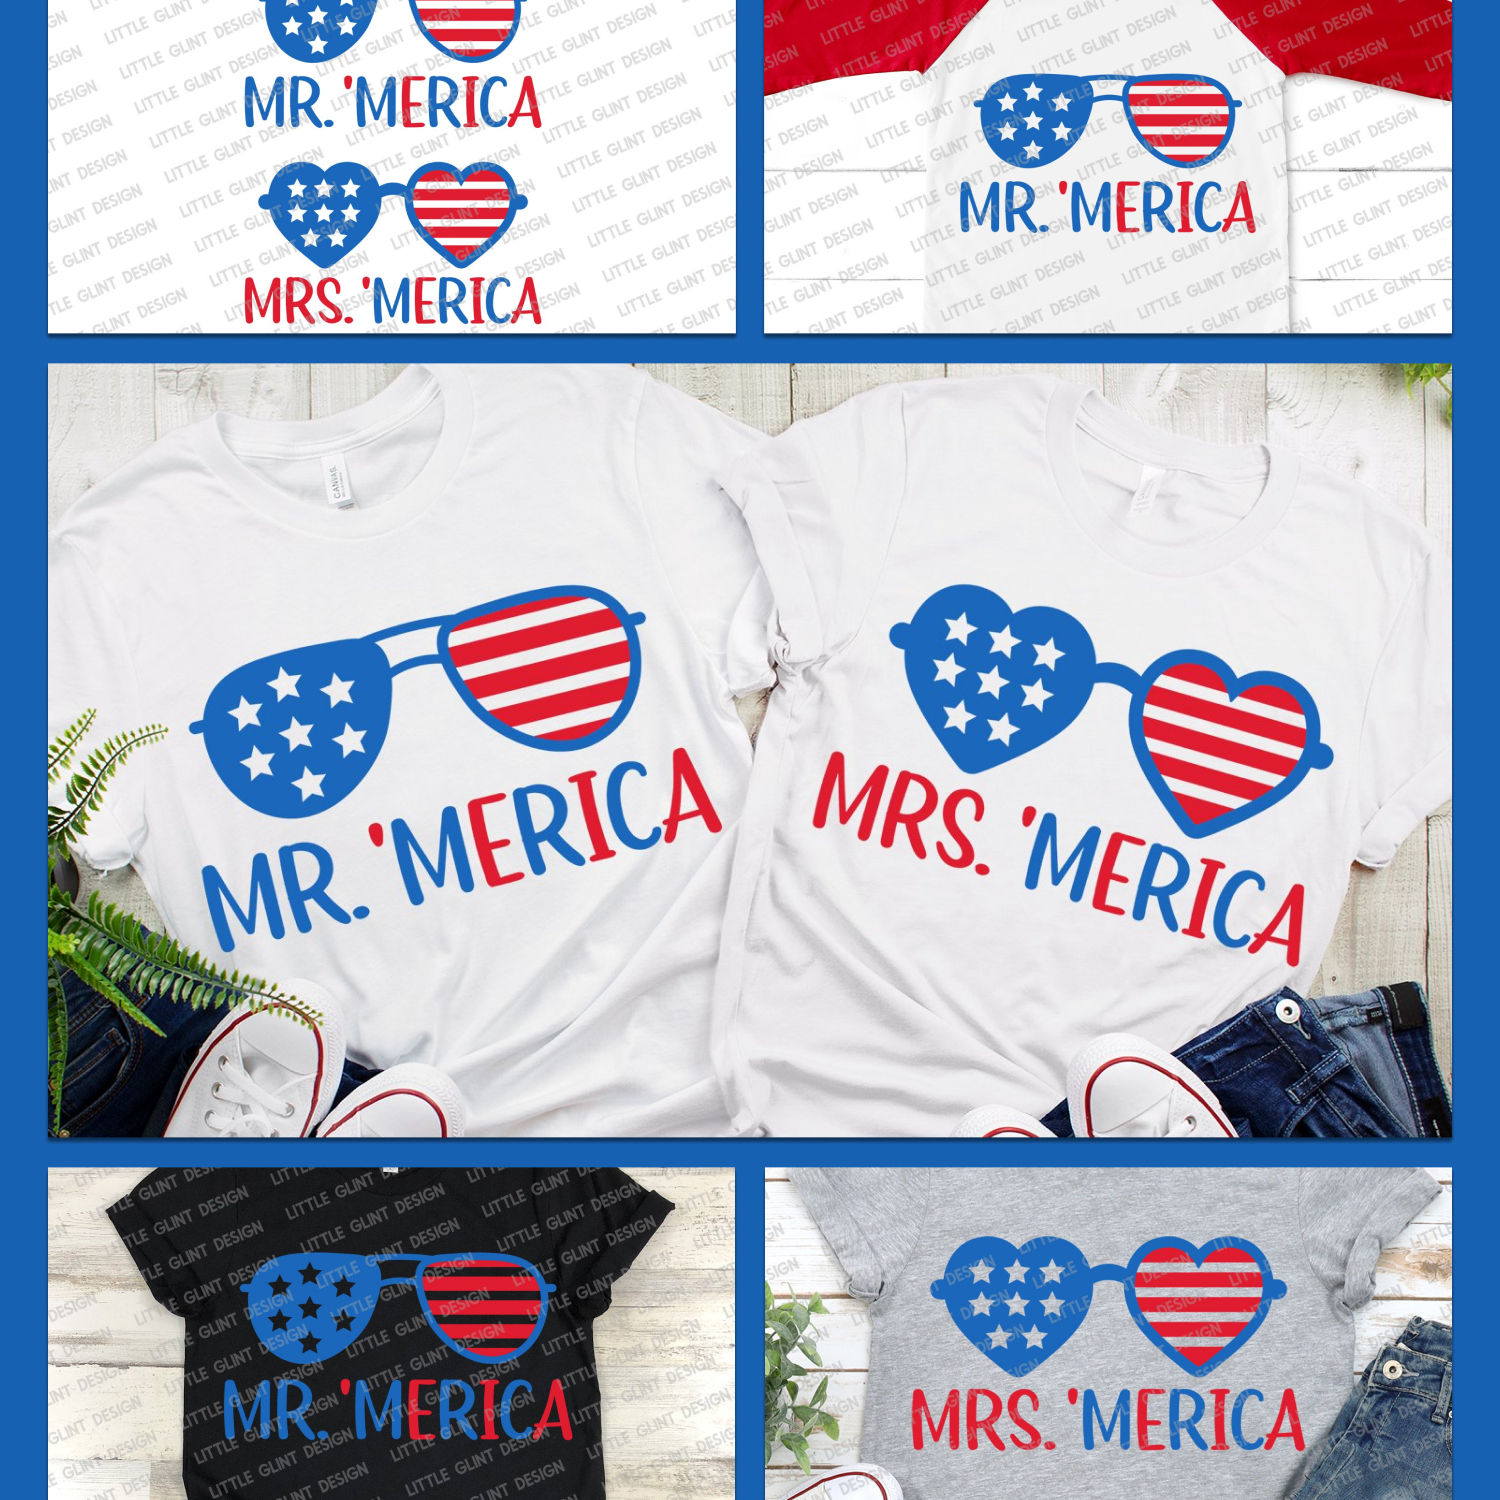 Stylish prints on t-shirts with American style.